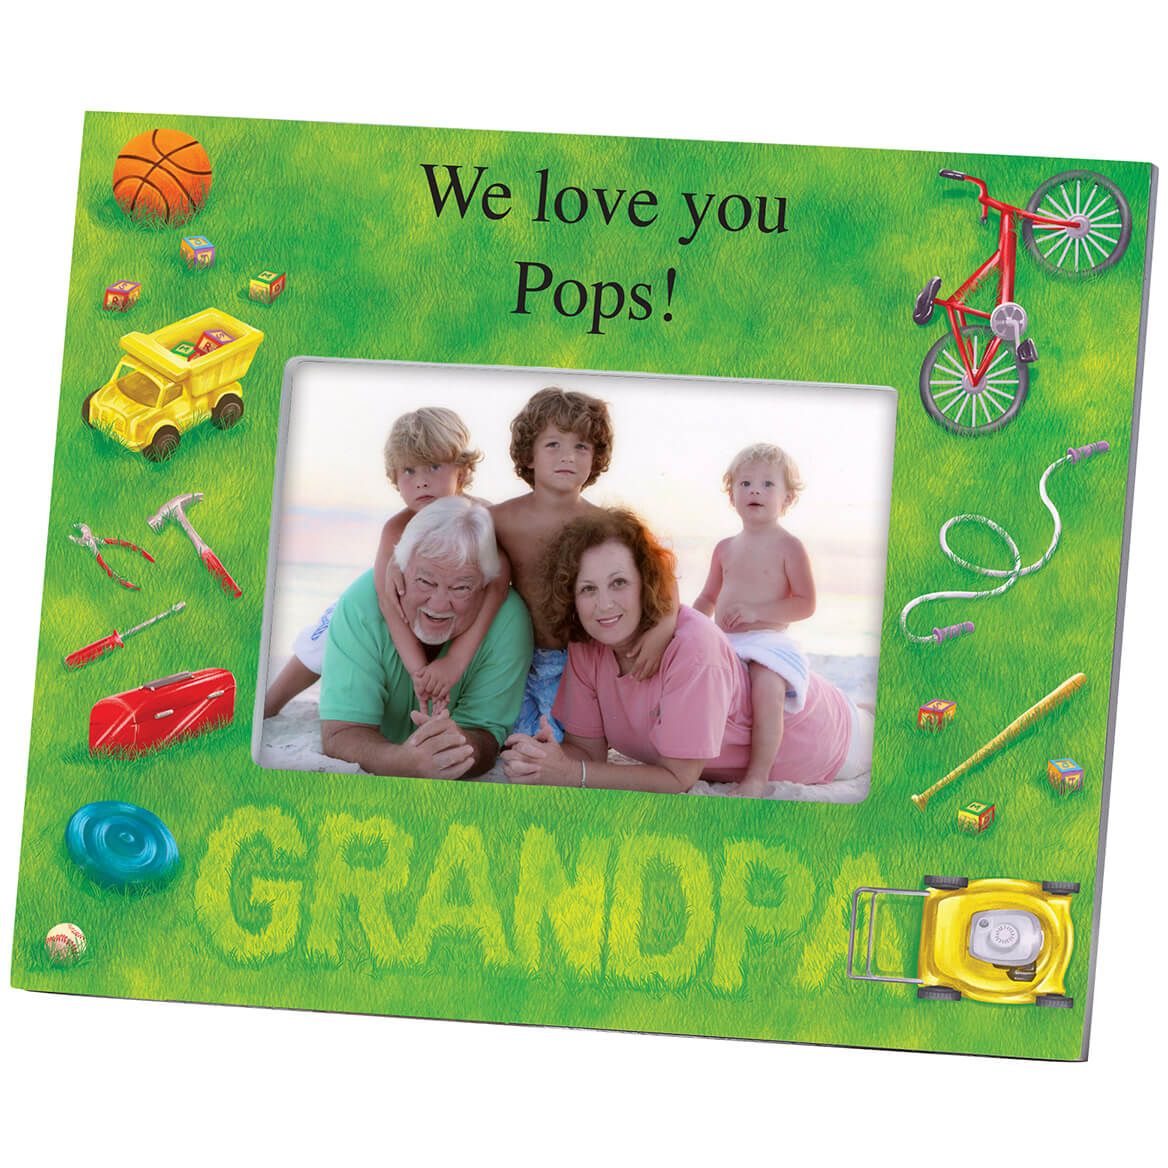 Personalized Lawn Words Grandpa Frame + '-' + 361189